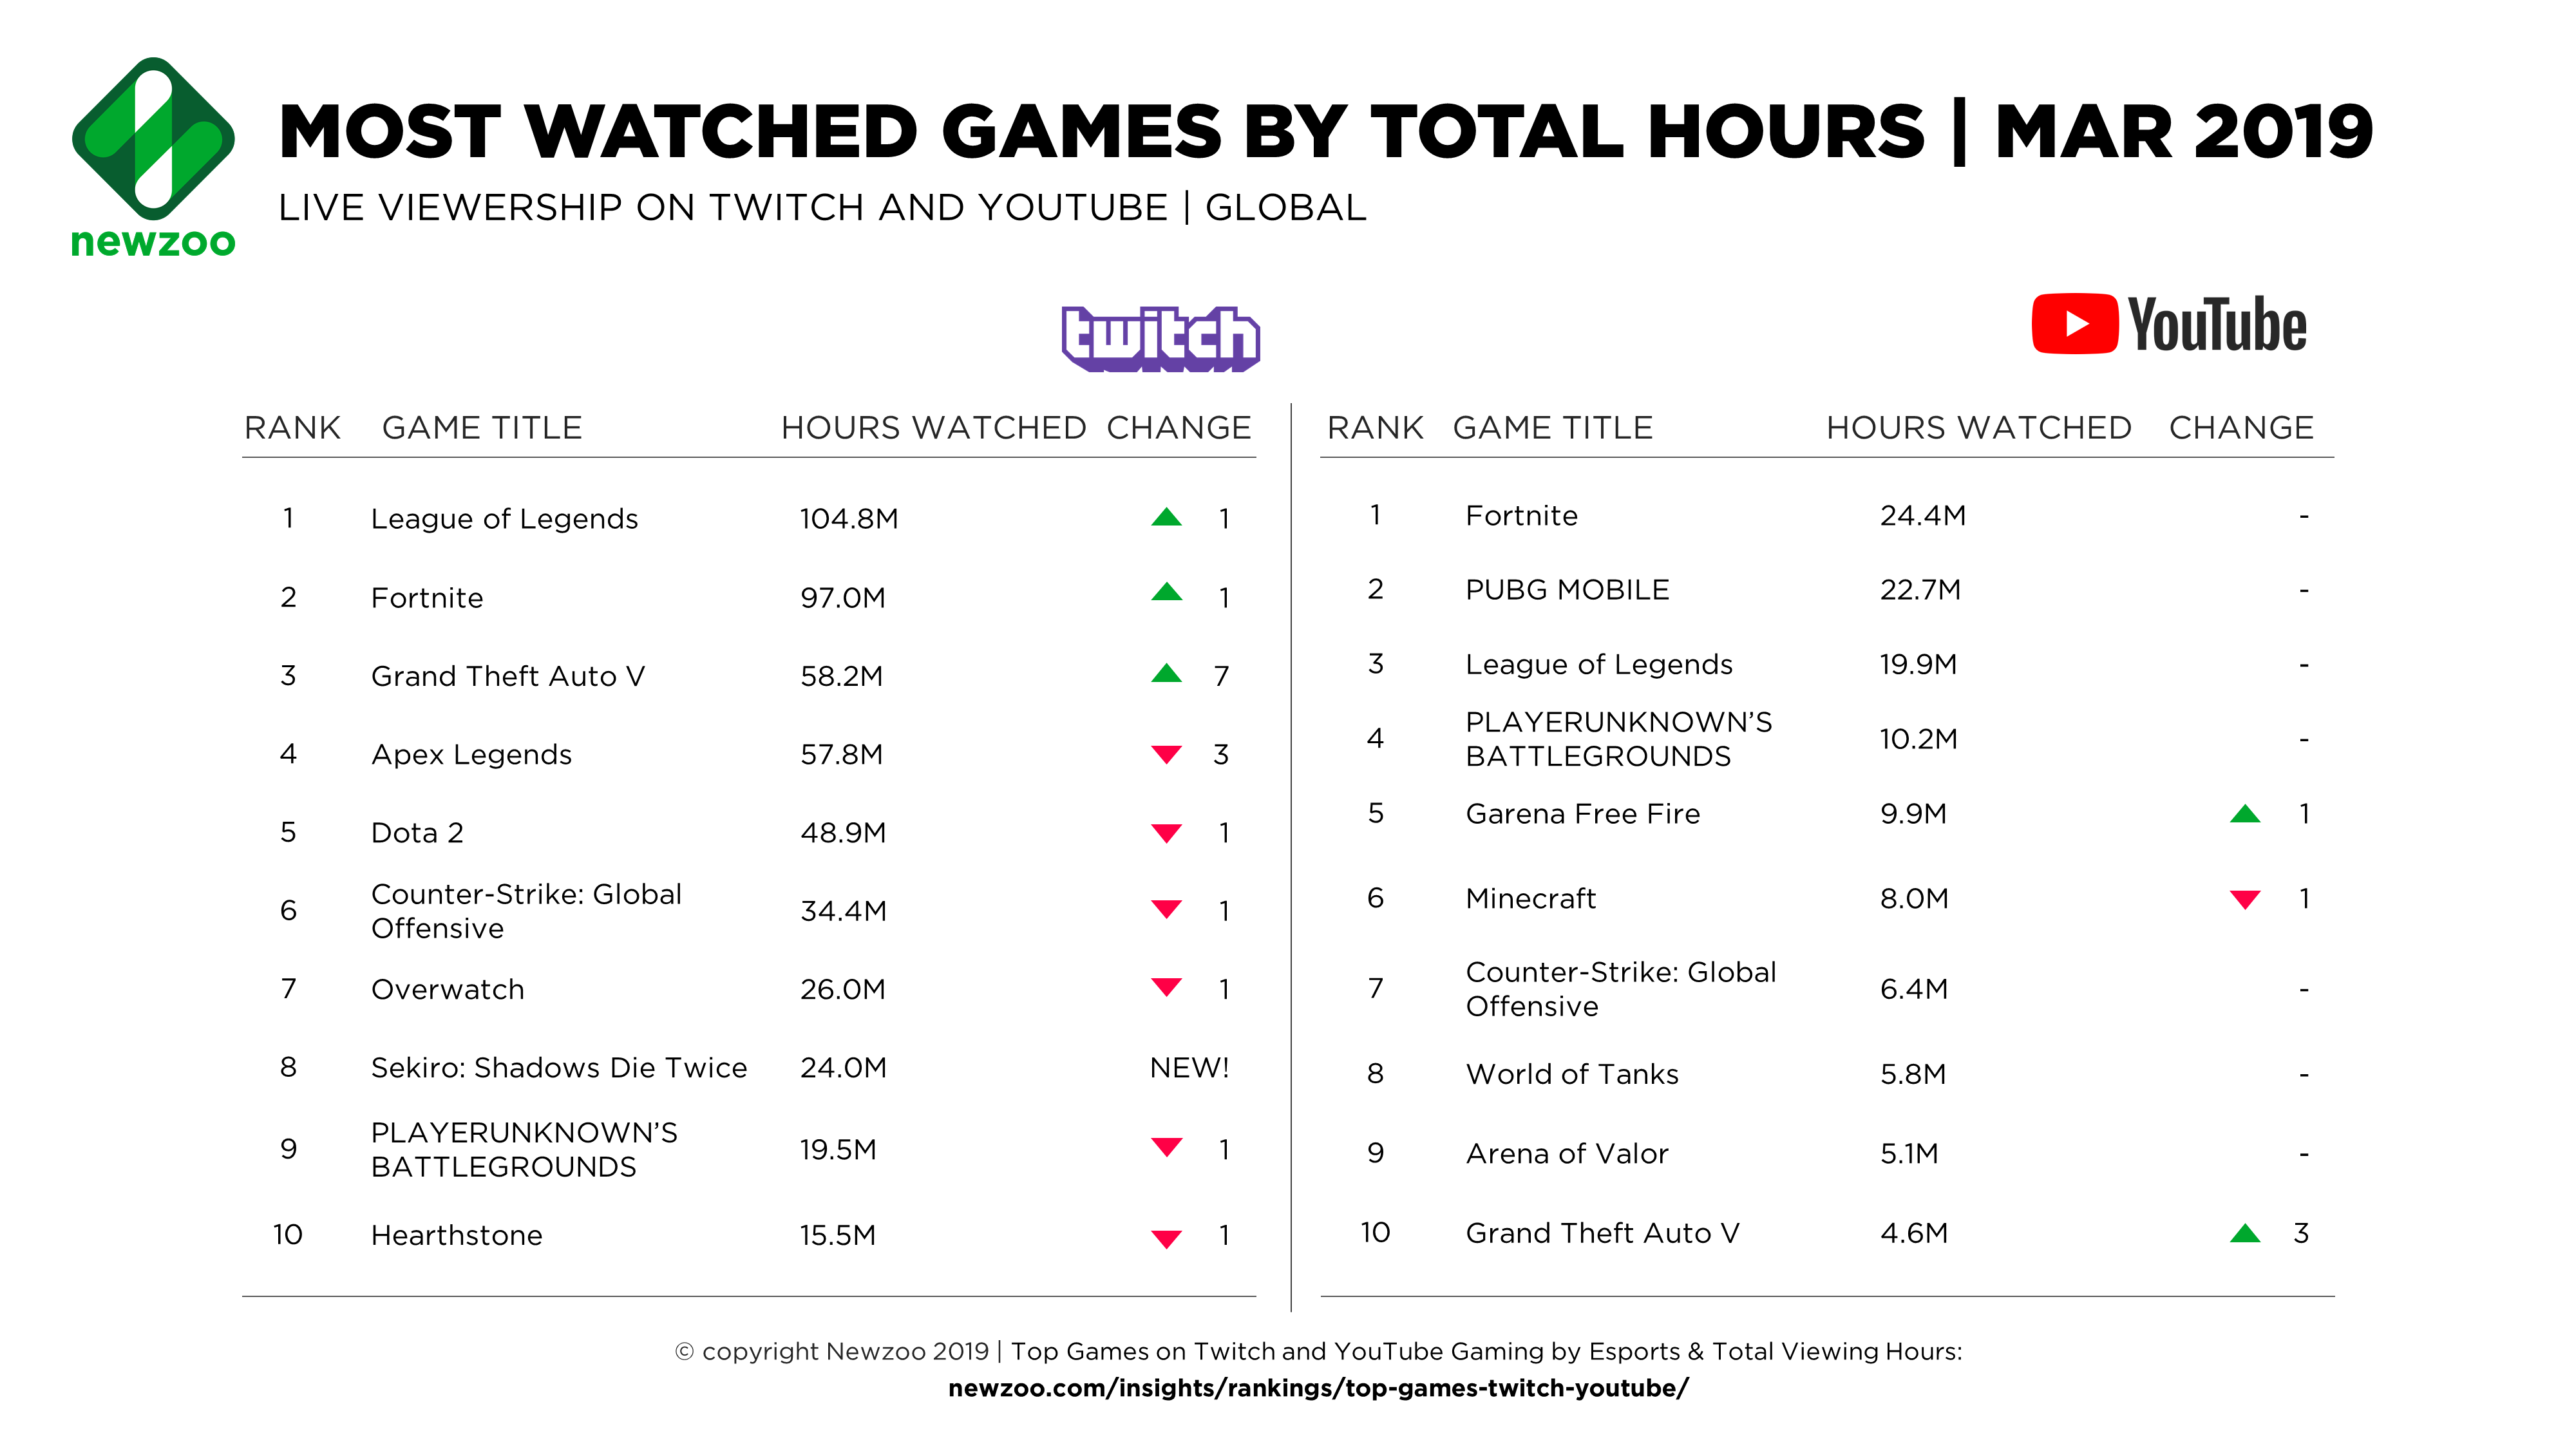 Most played video games by player count on OpenAxis